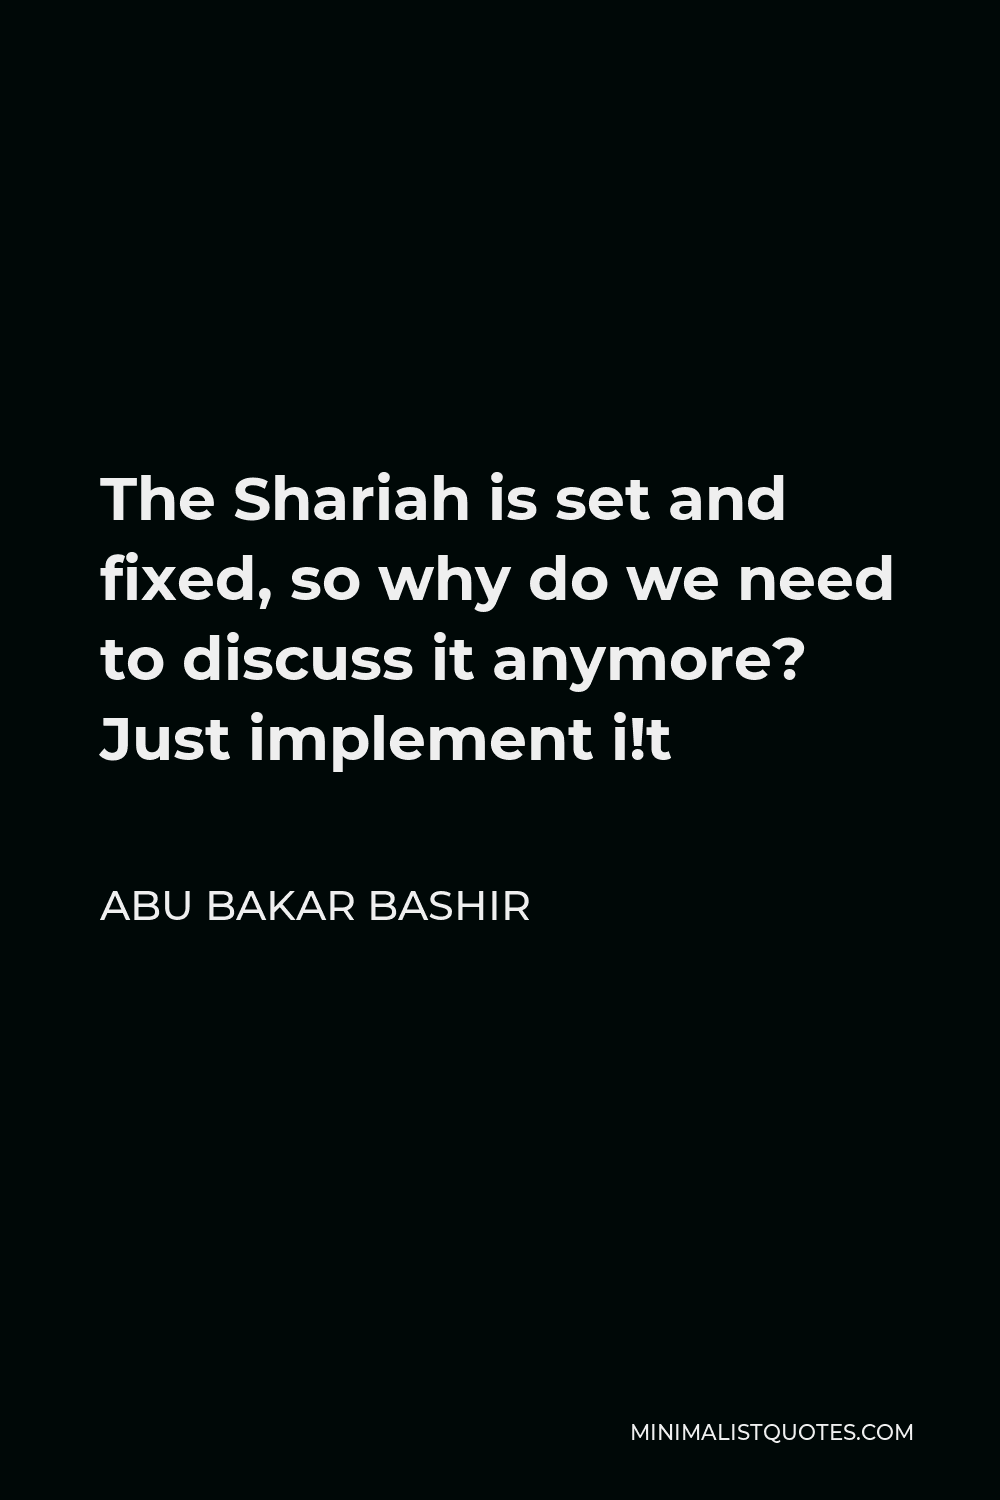 Abu Bakar Bashir Quote - The Shariah is set and fixed, so why do we need to discuss it anymore? Just implement i!t